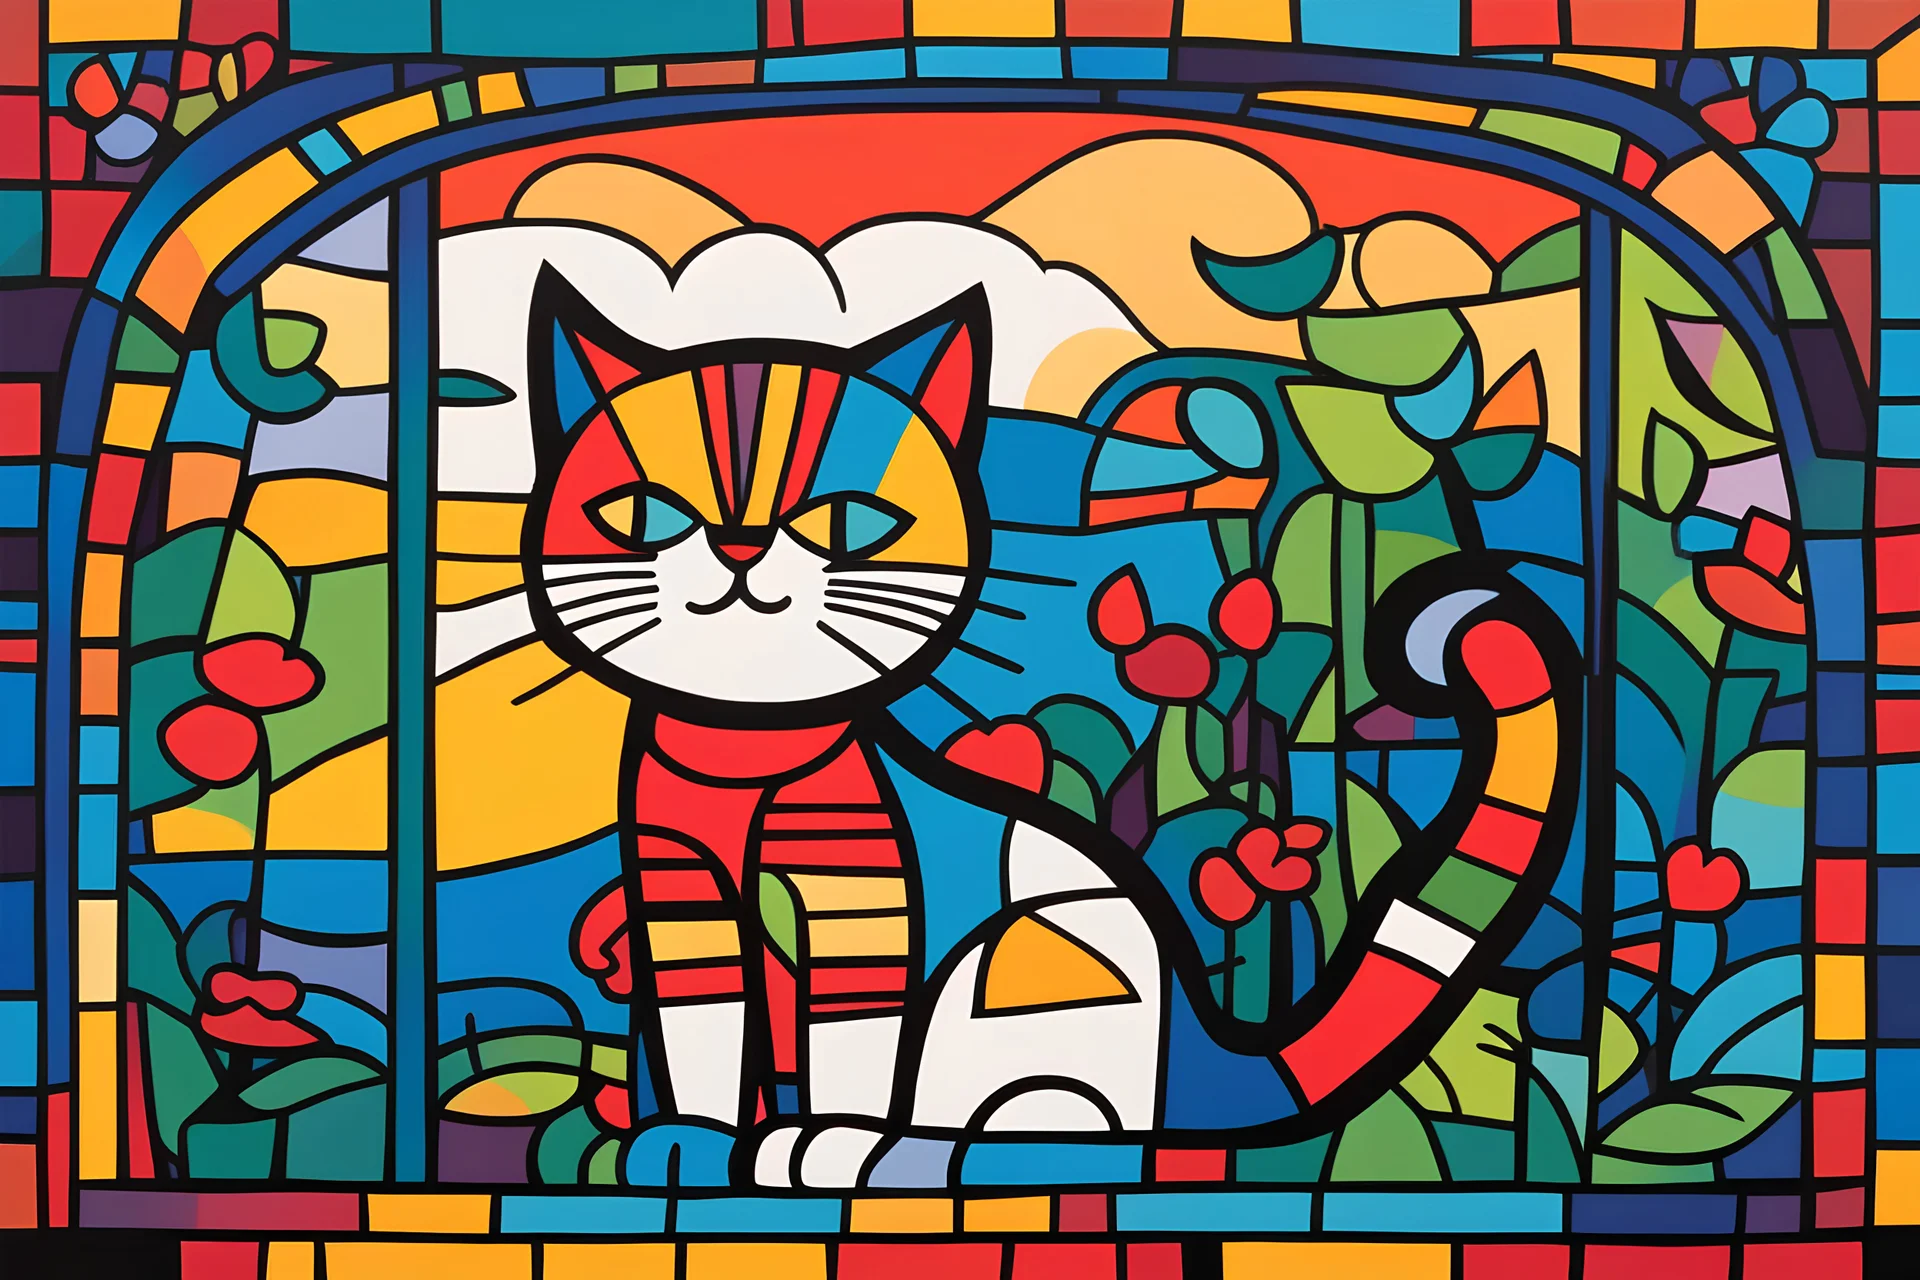 the cat in the window painting by Romero Brito